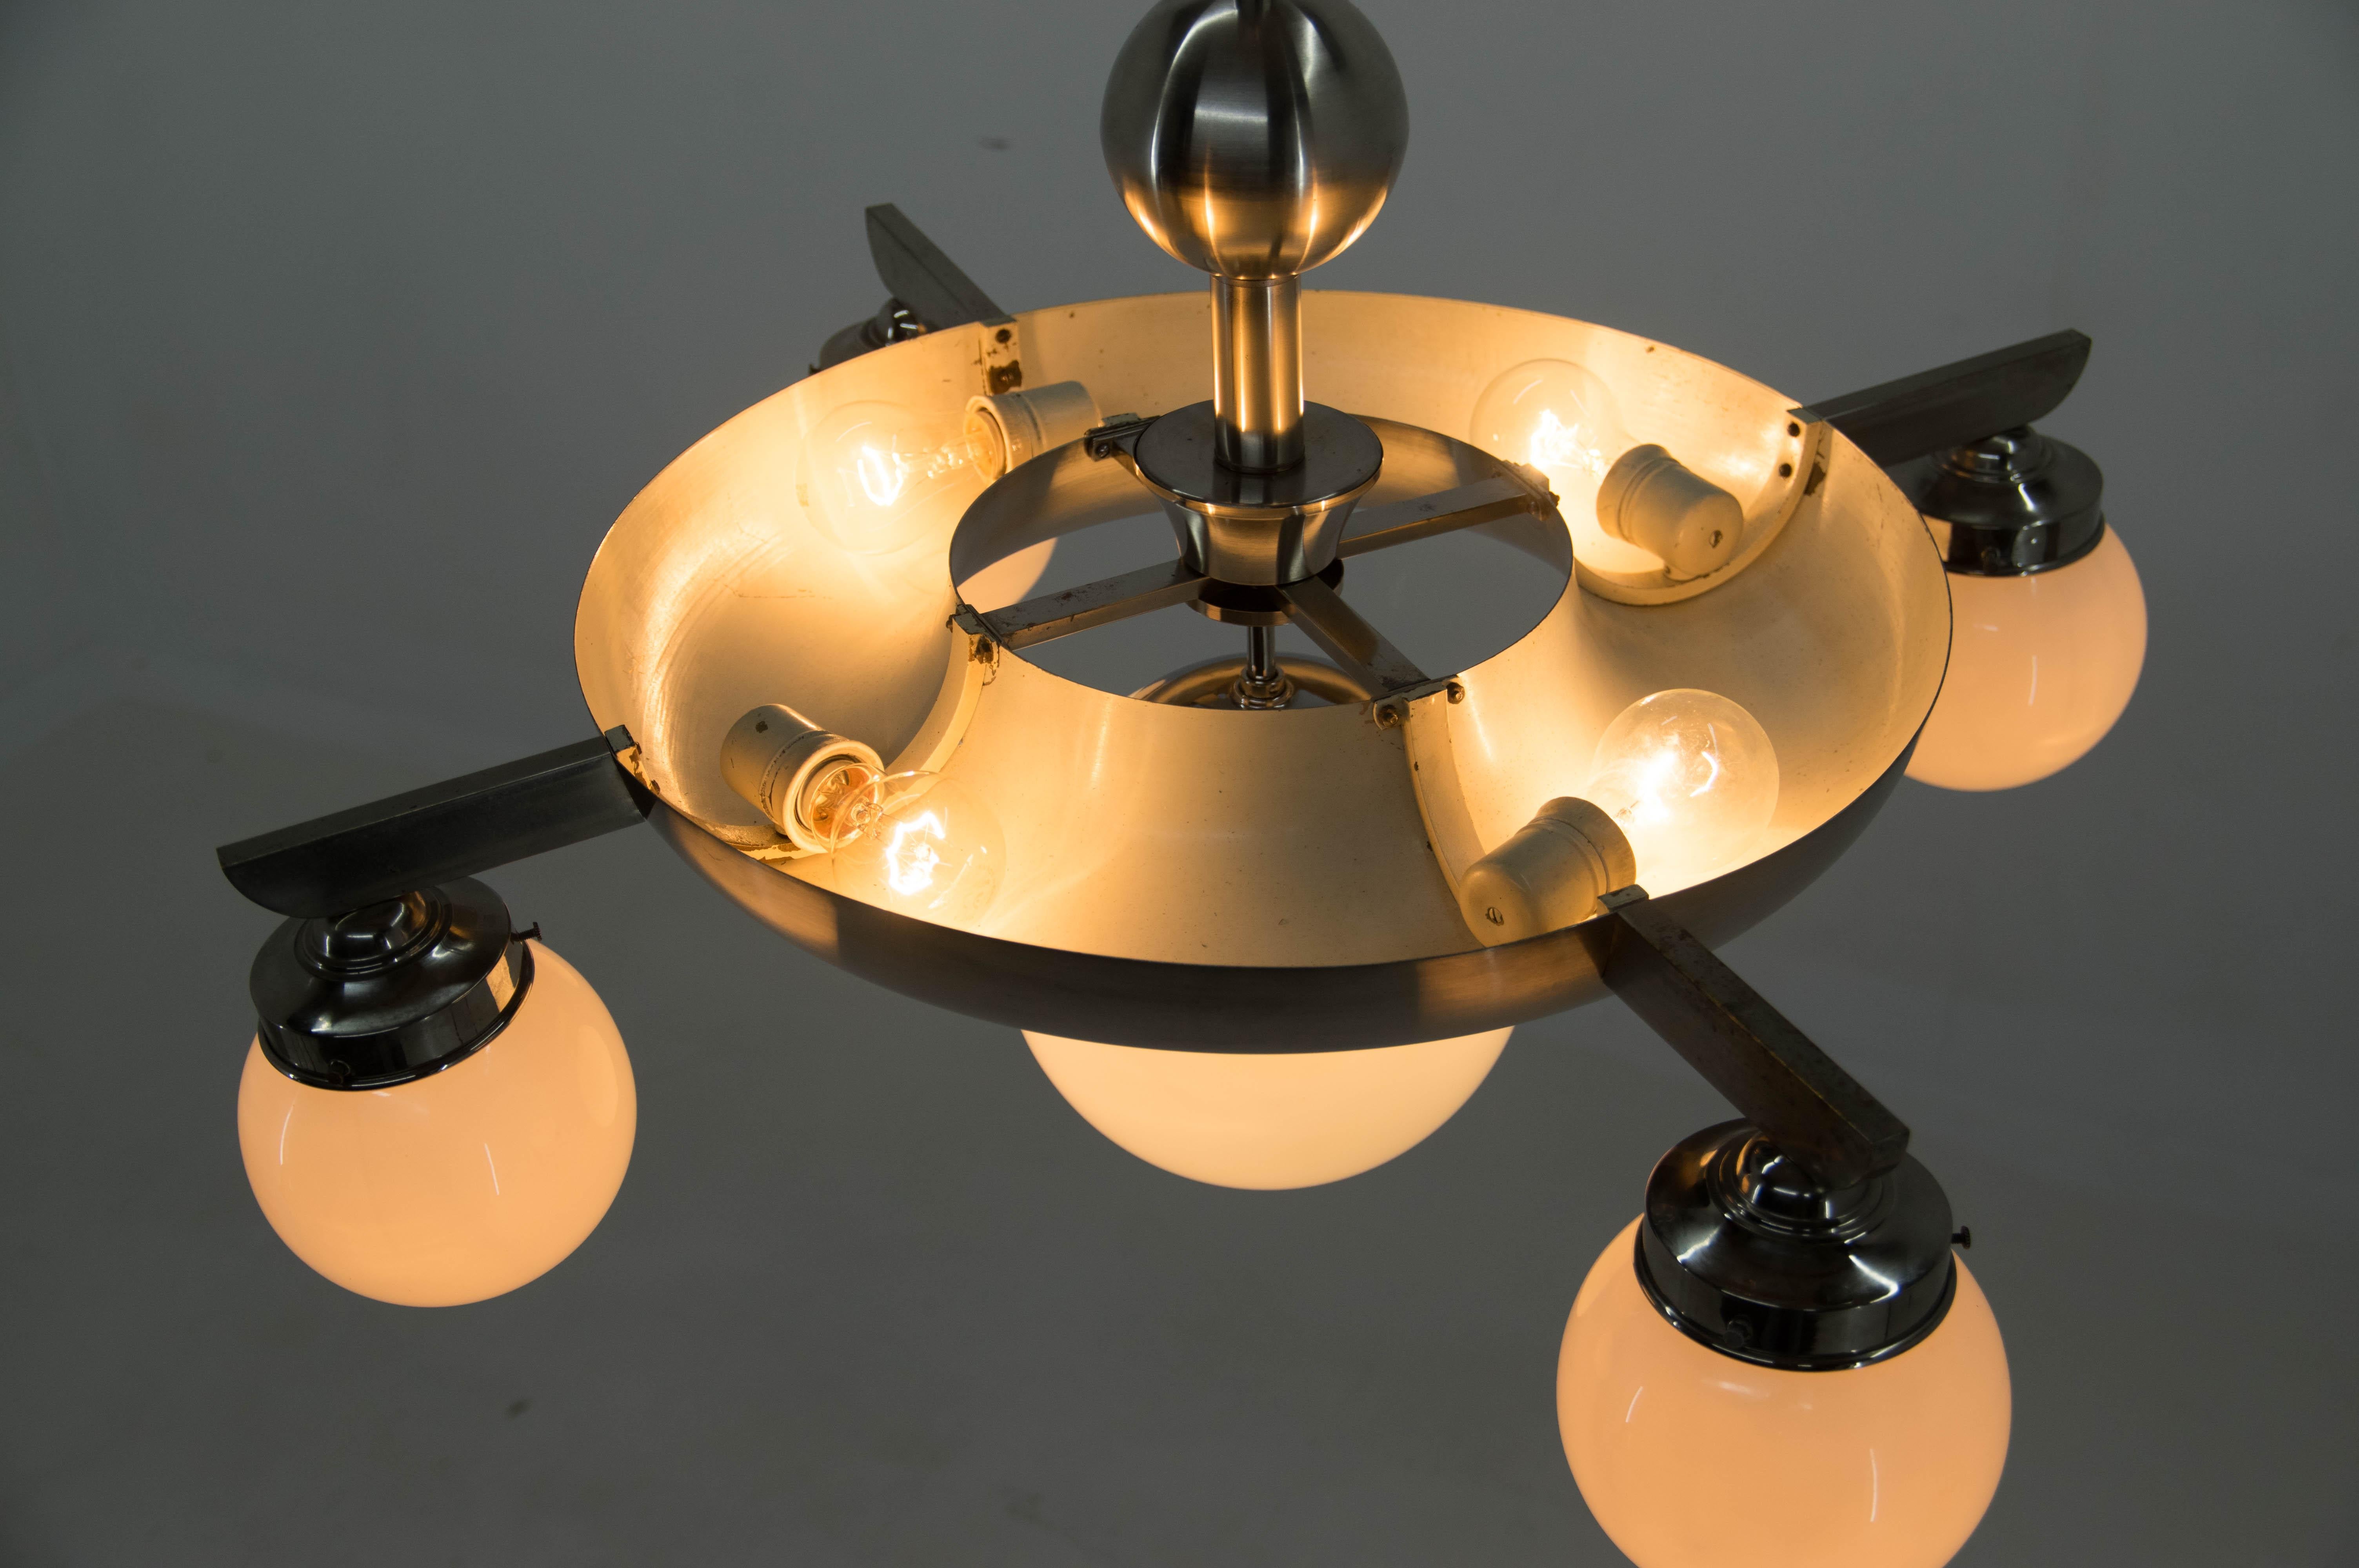 Chrome Rare Functionalism or Bauhaus Chandelier by IAS, 1920s For Sale